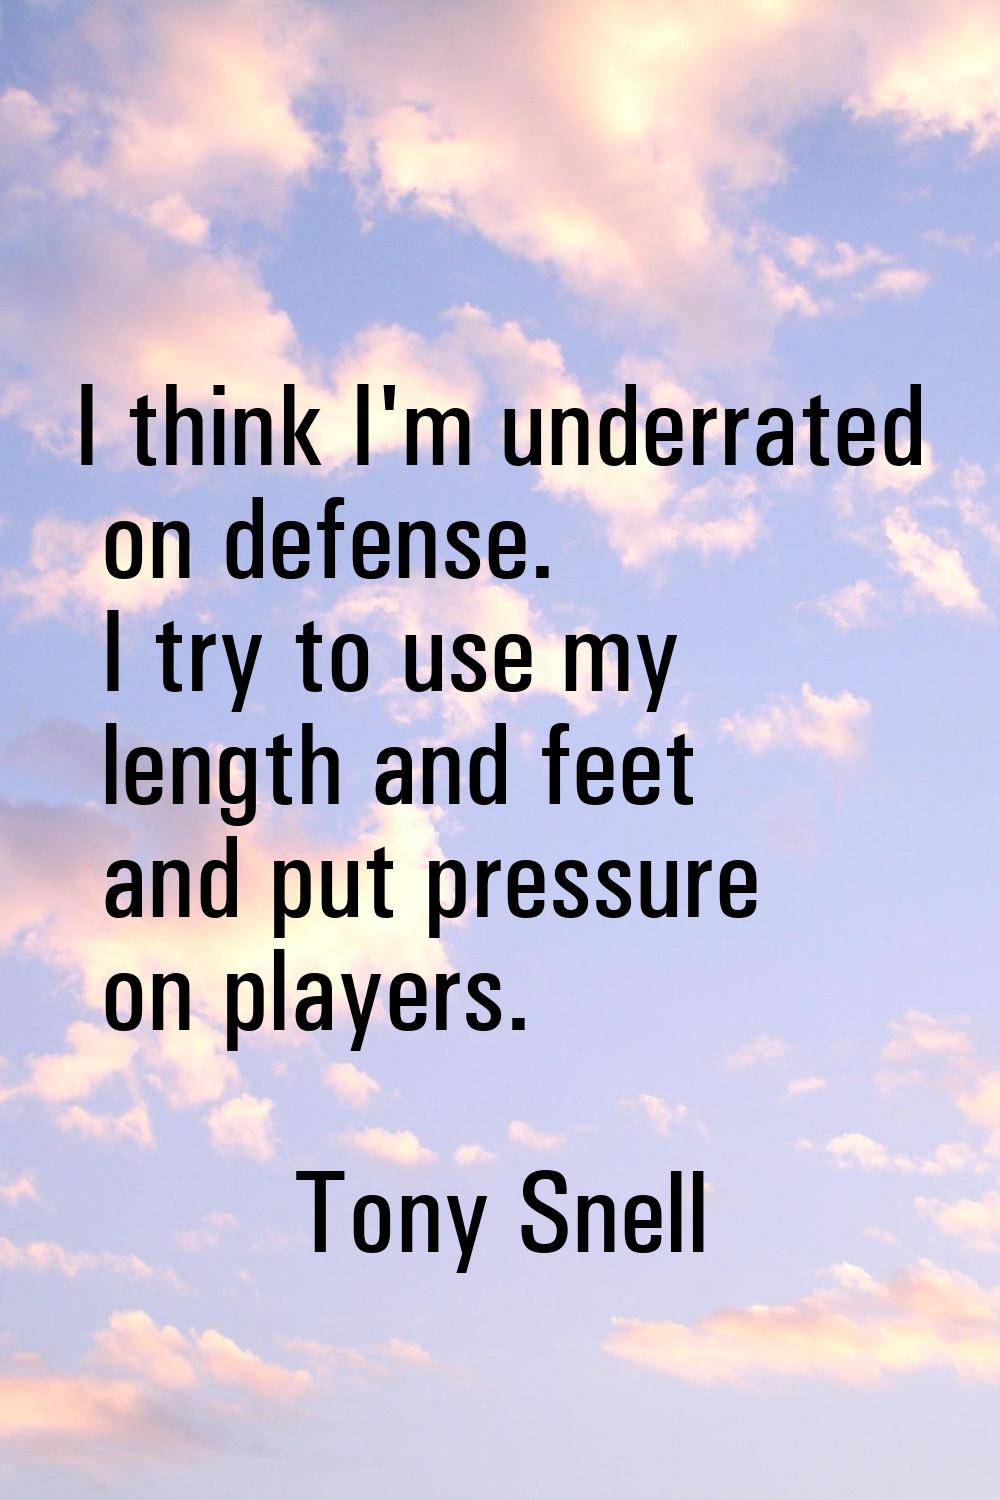 I think I'm underrated on defense. I try to use my length and feet and put pressure on players.